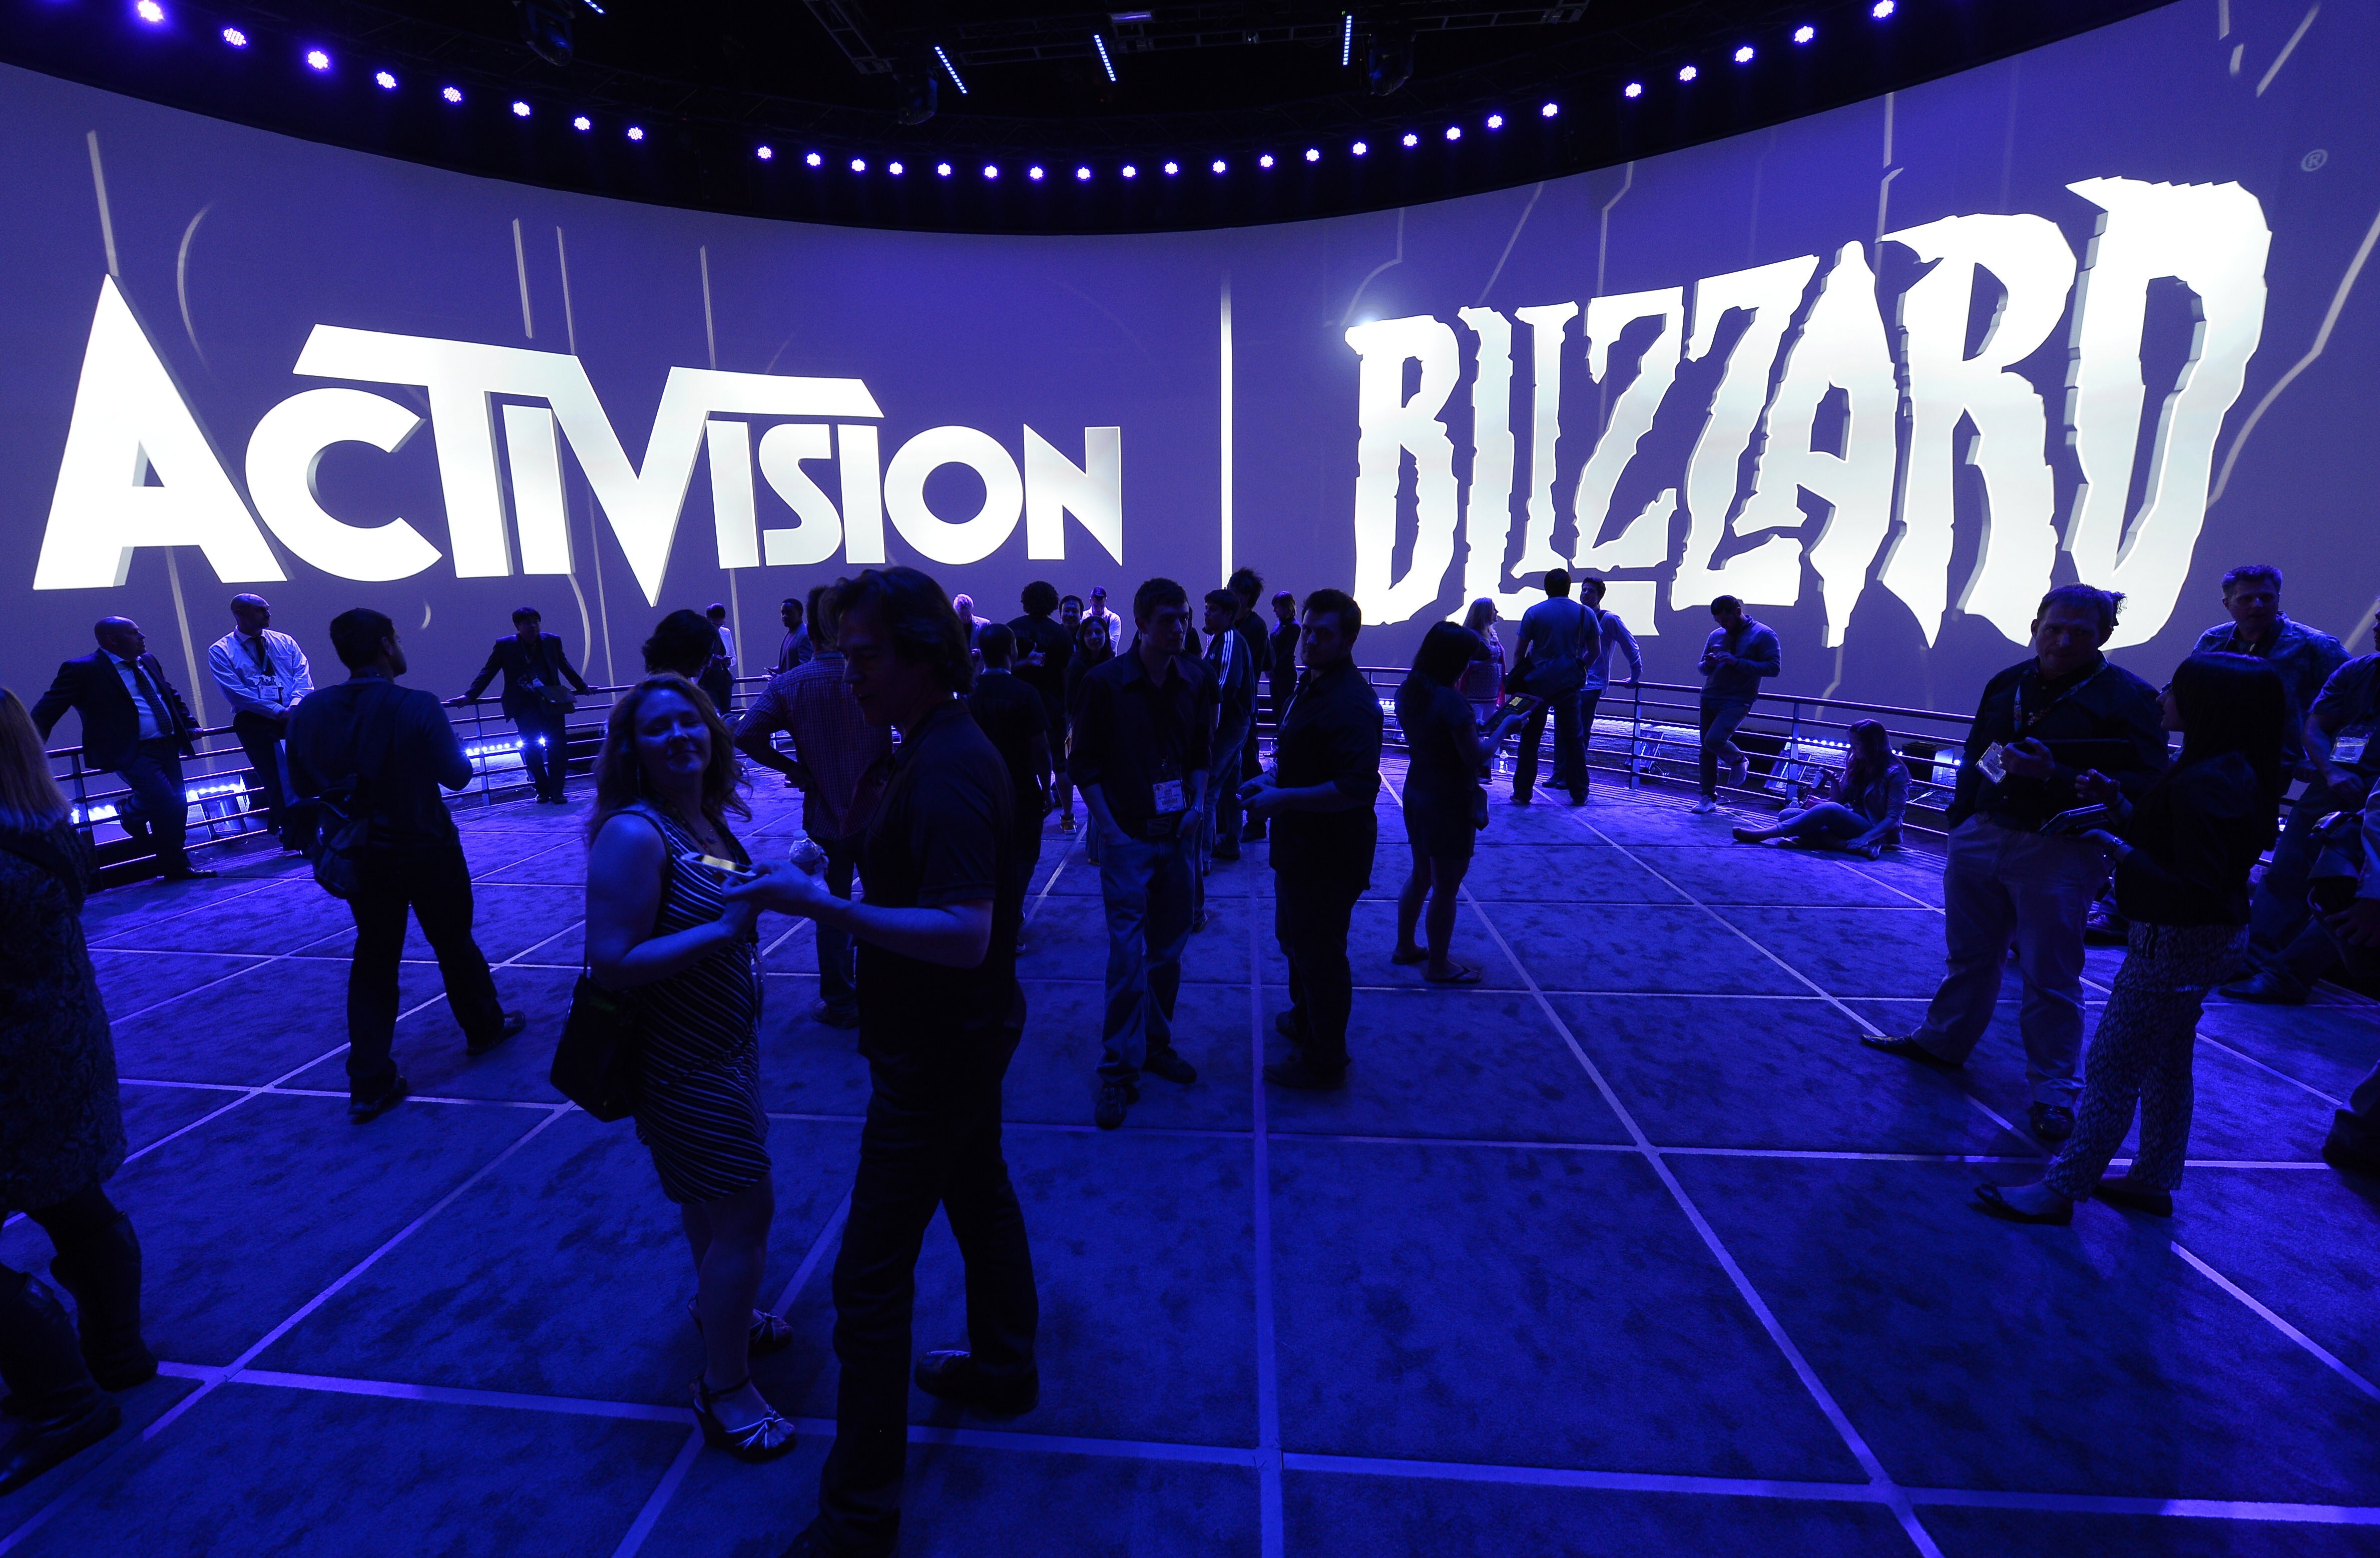 Some shareholders ask Activision Blizzard CEO to resign